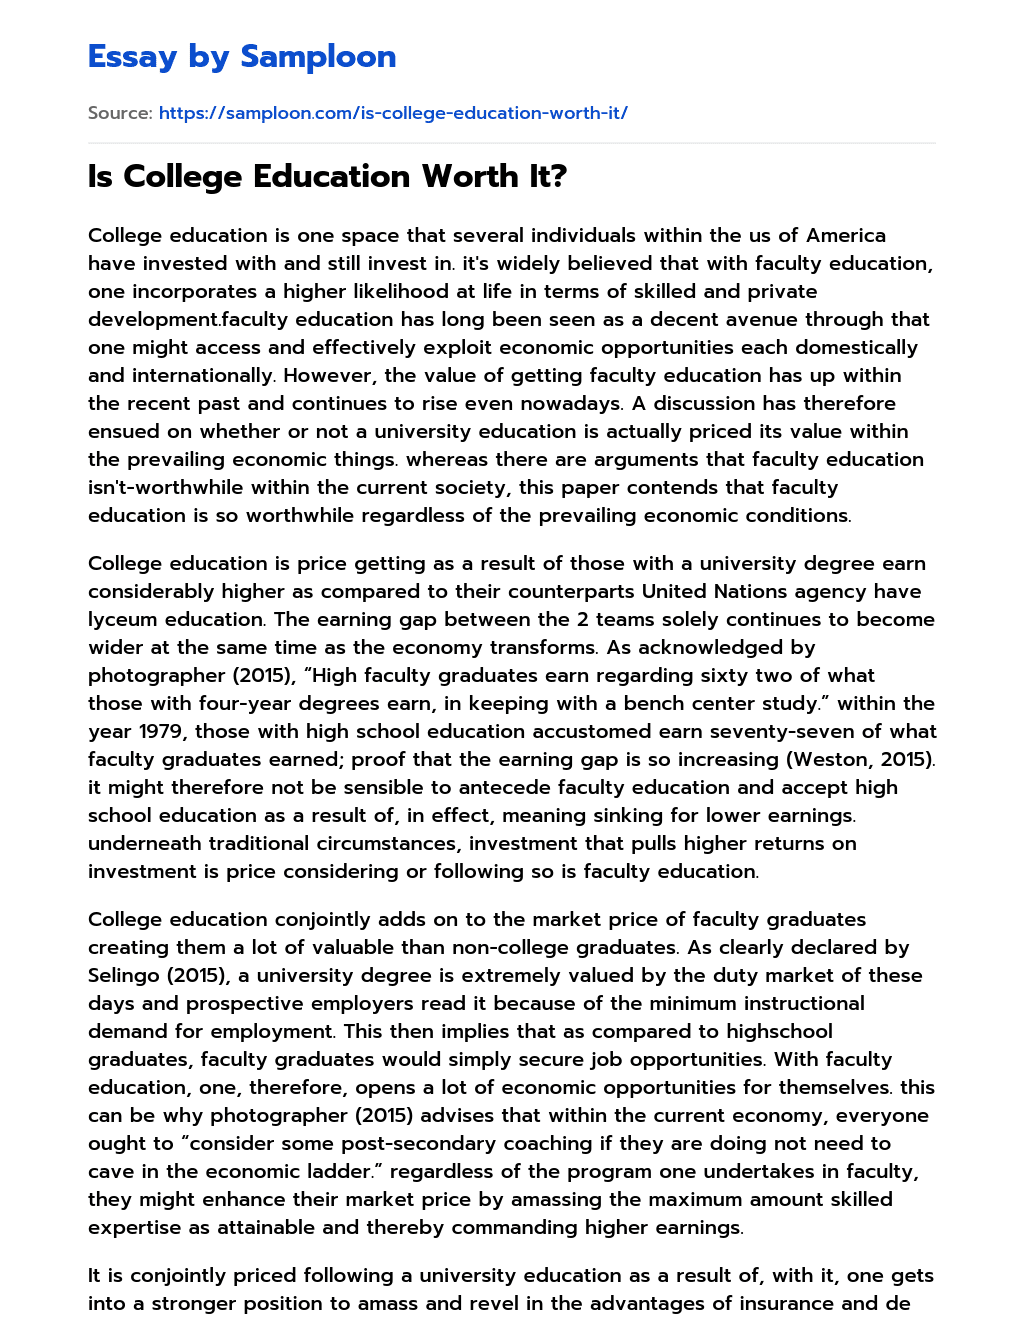 Is College Education Worth It? essay